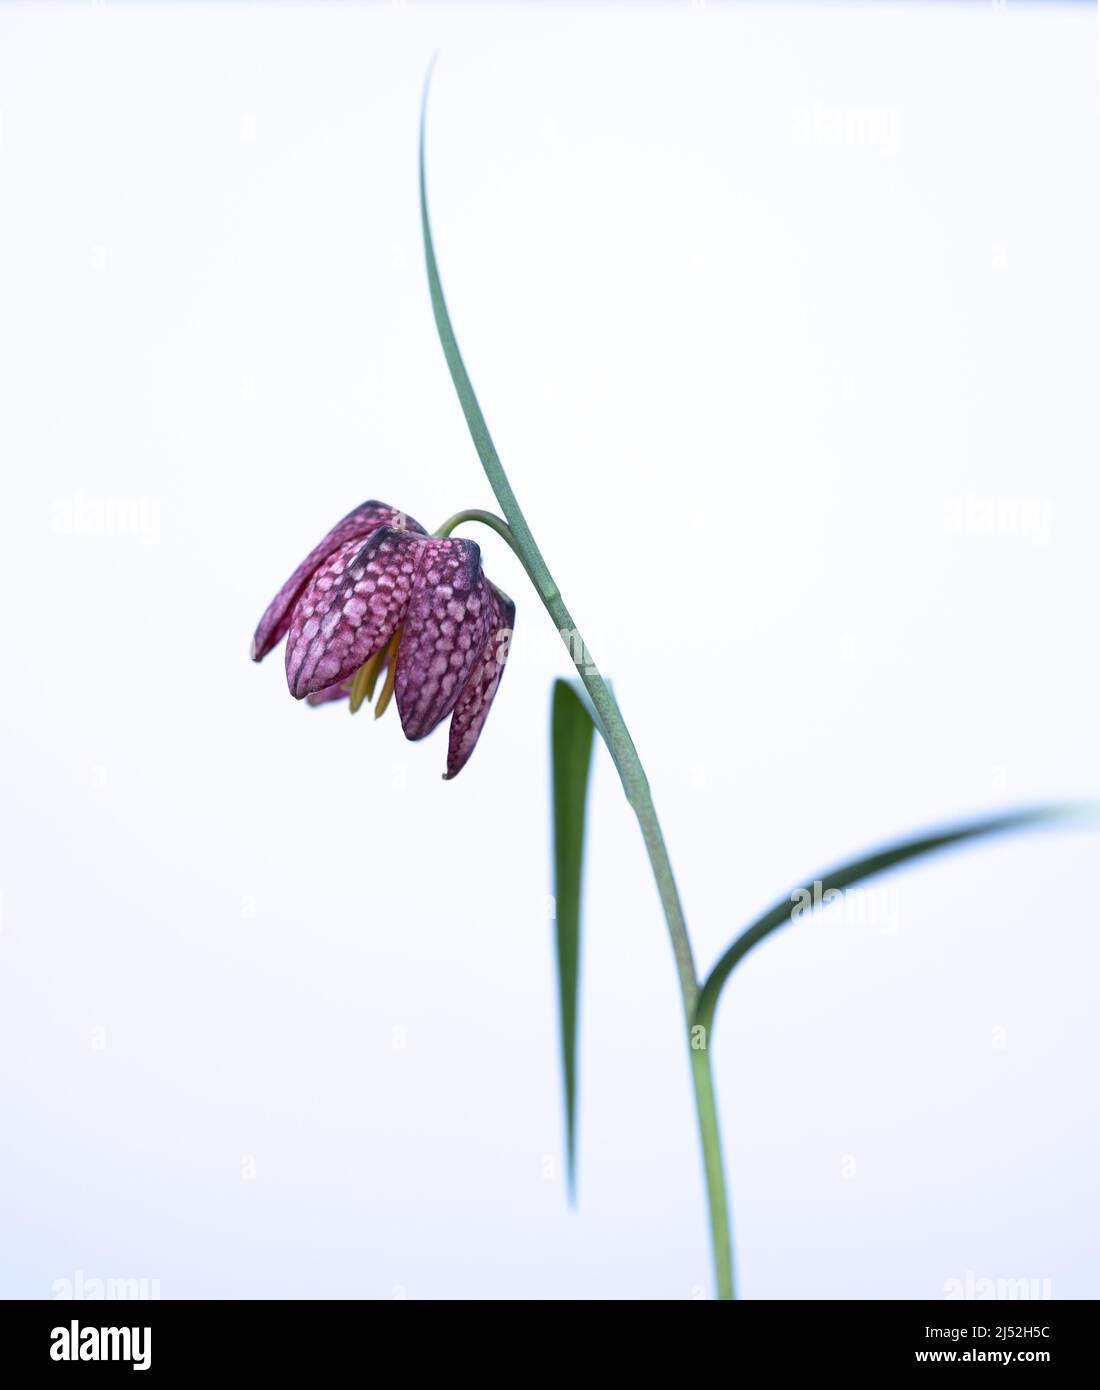 Snakes head Fritillary (Fritillaria meleagris) chequered spring flower against a white background Stock Photo